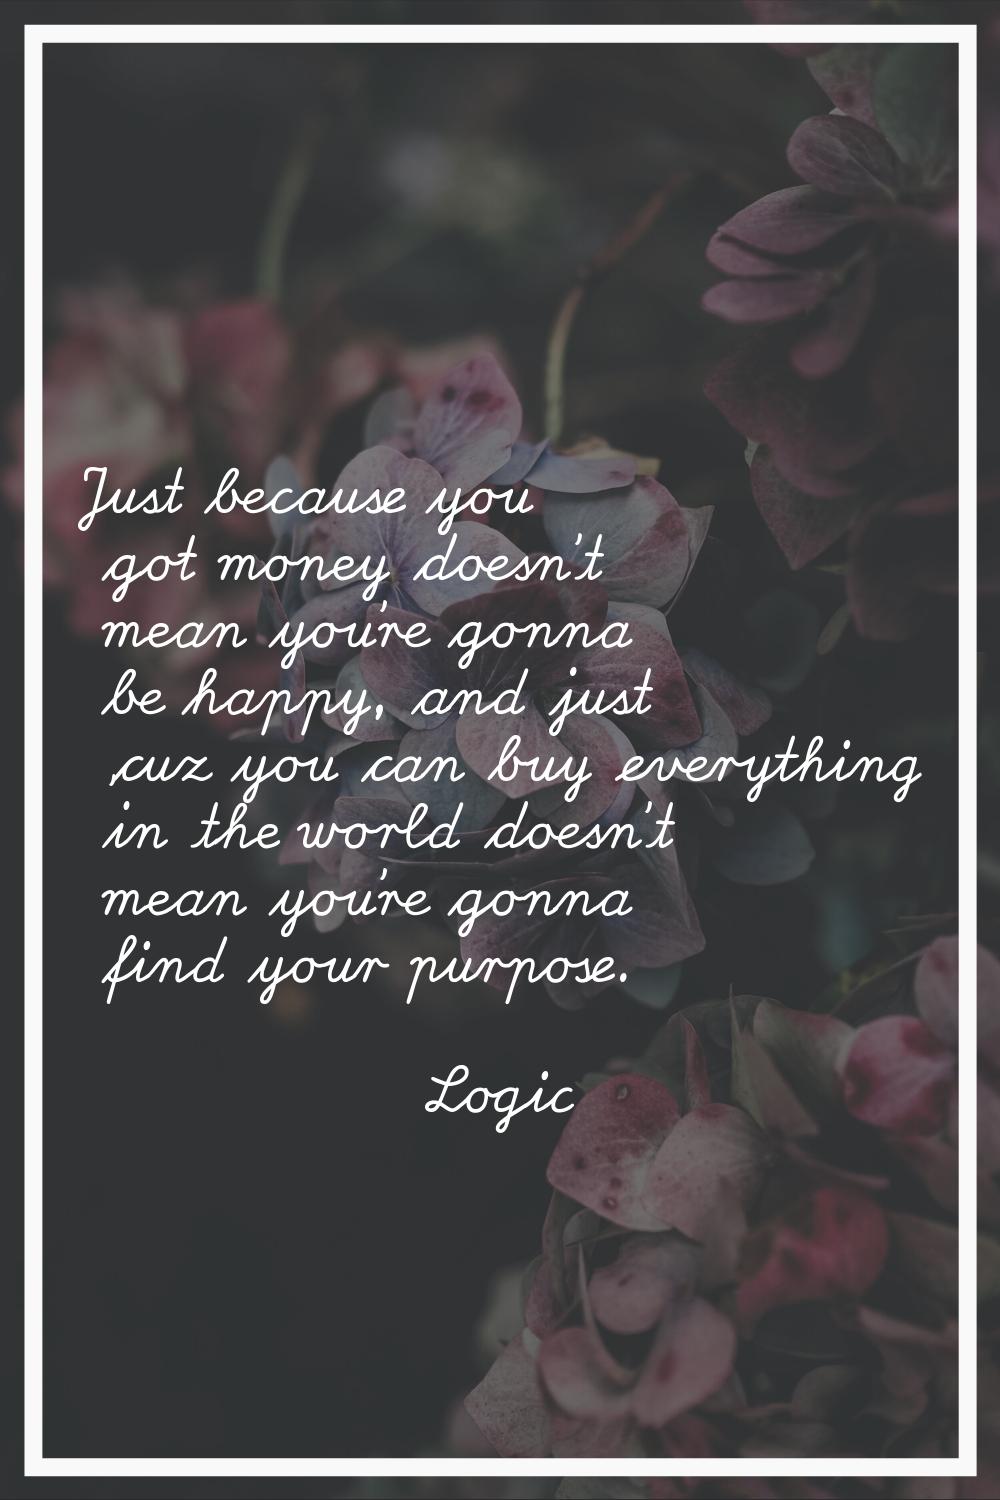 Just because you got money doesn't mean you're gonna be happy, and just 'cuz you can buy everything